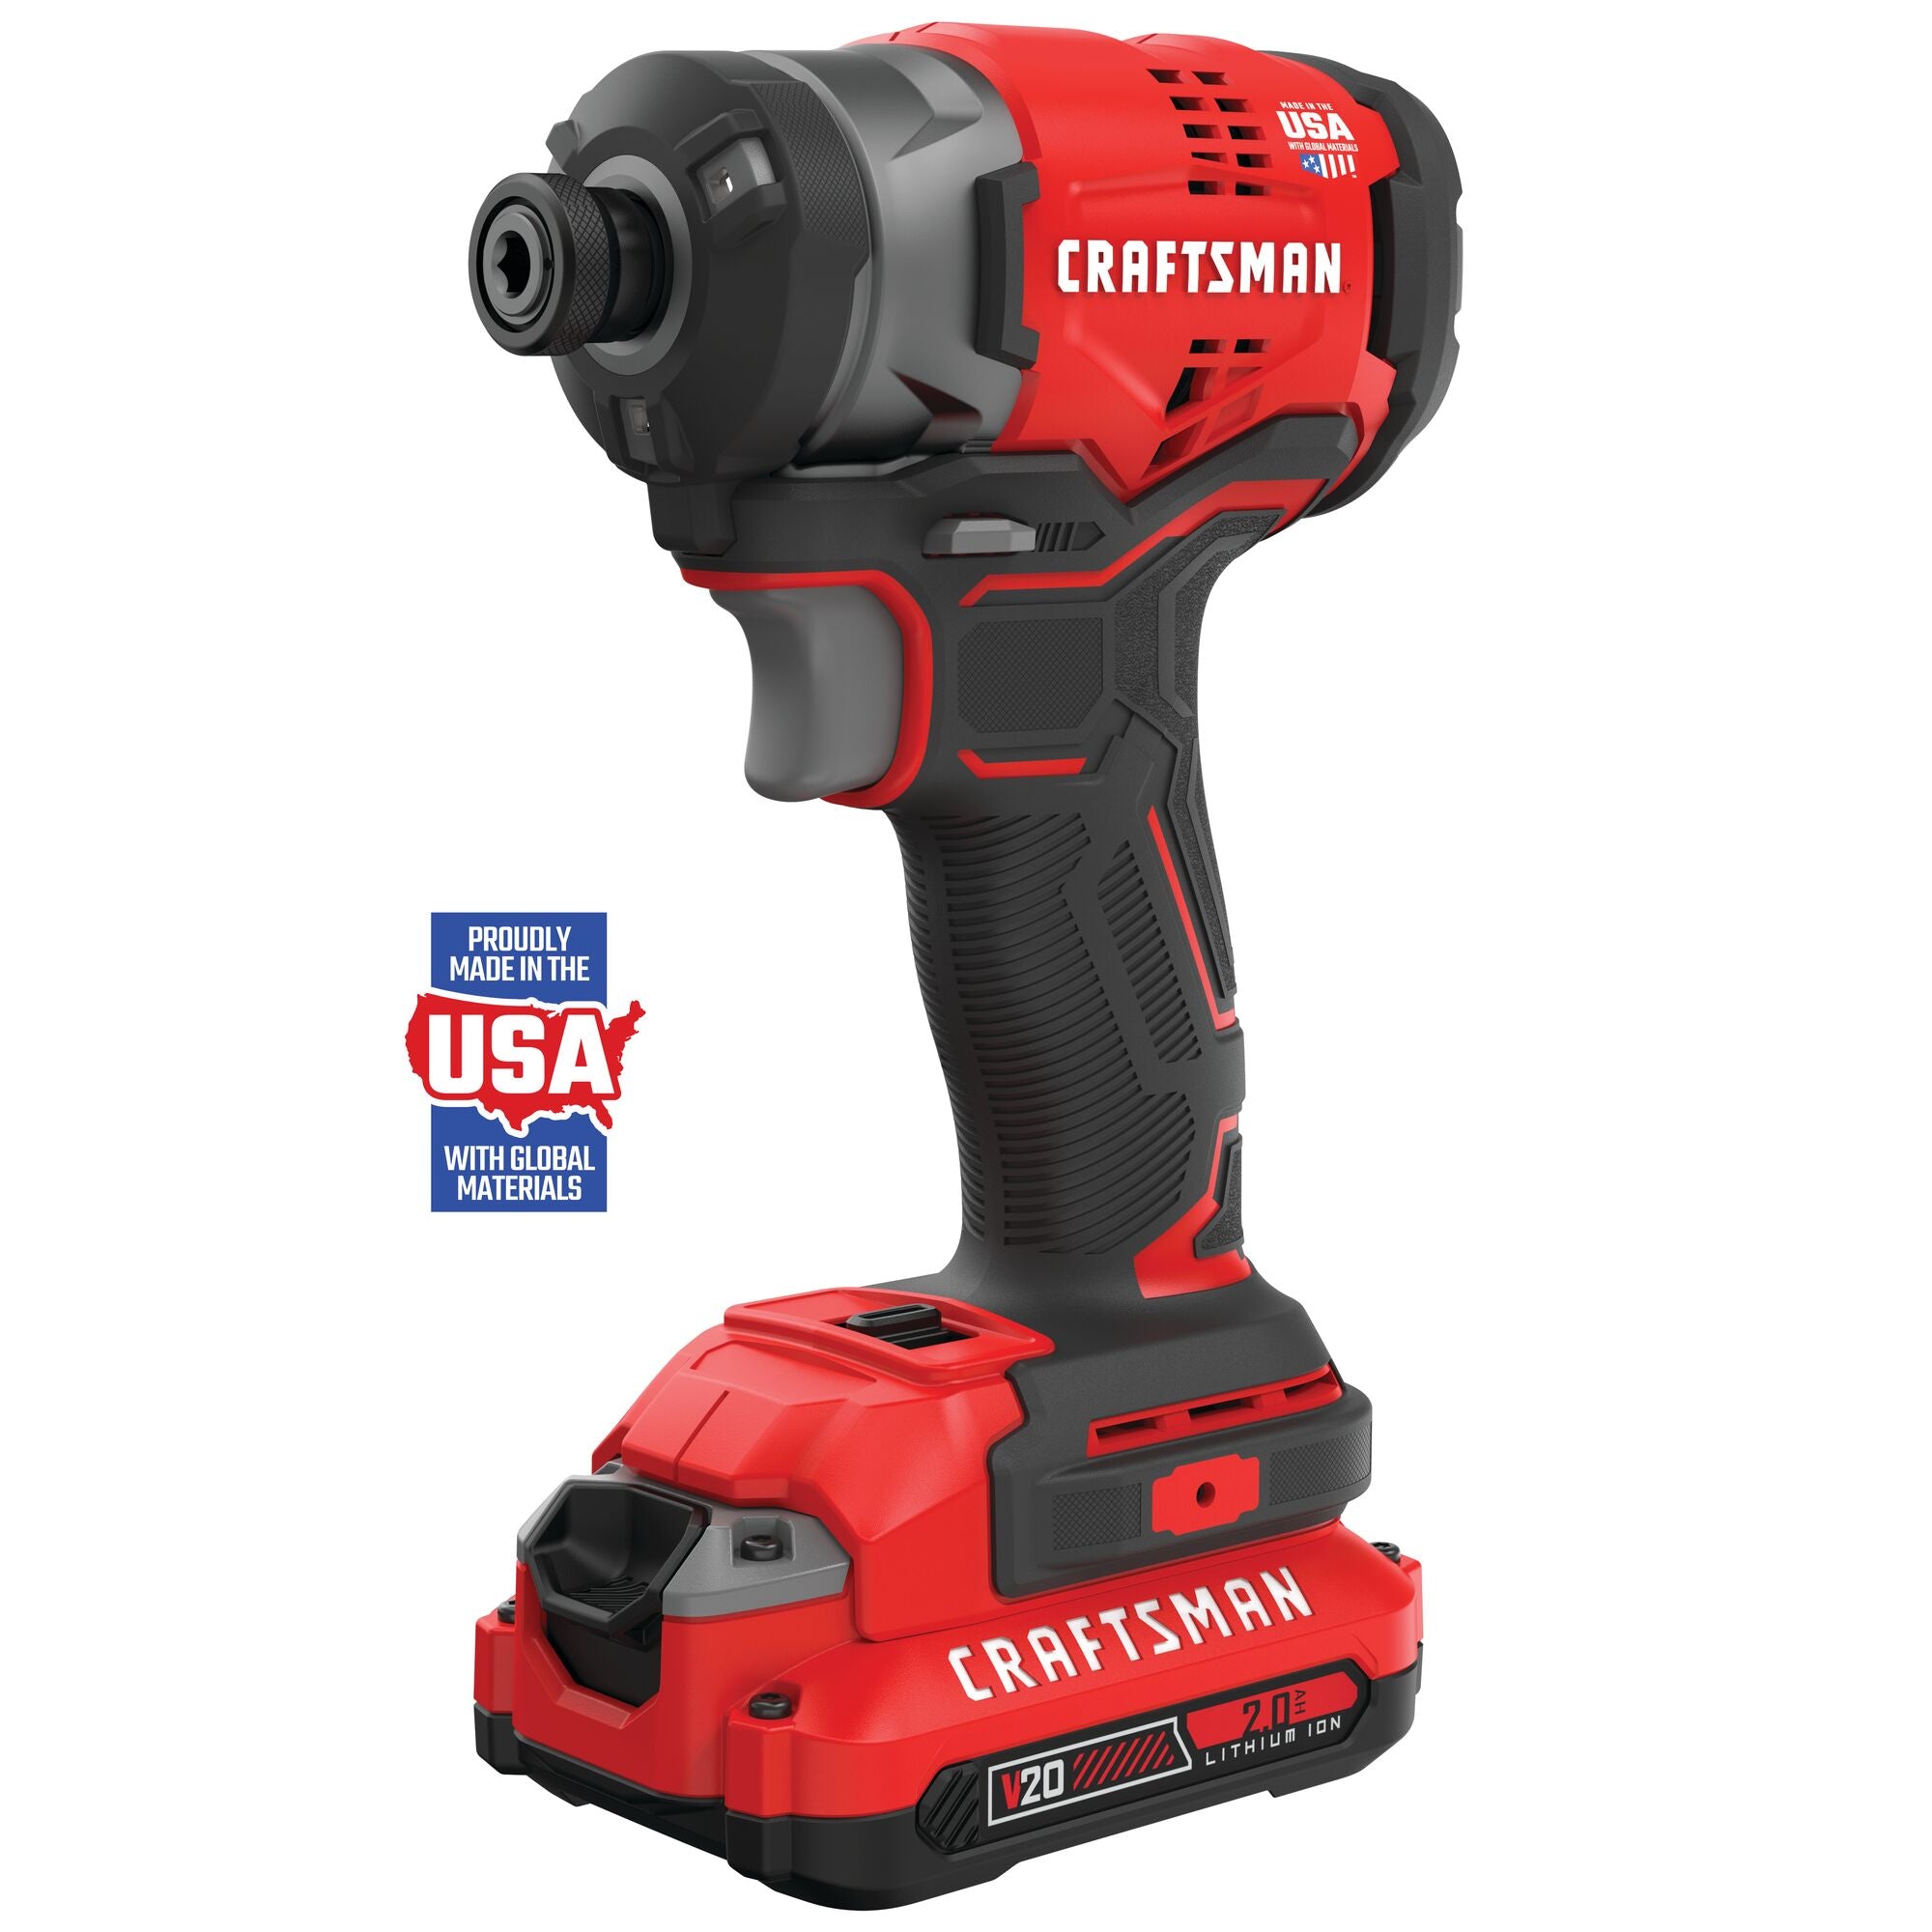 Proudly made in the usa with global materials feature of brushless cordless impact driver 2 batteries.